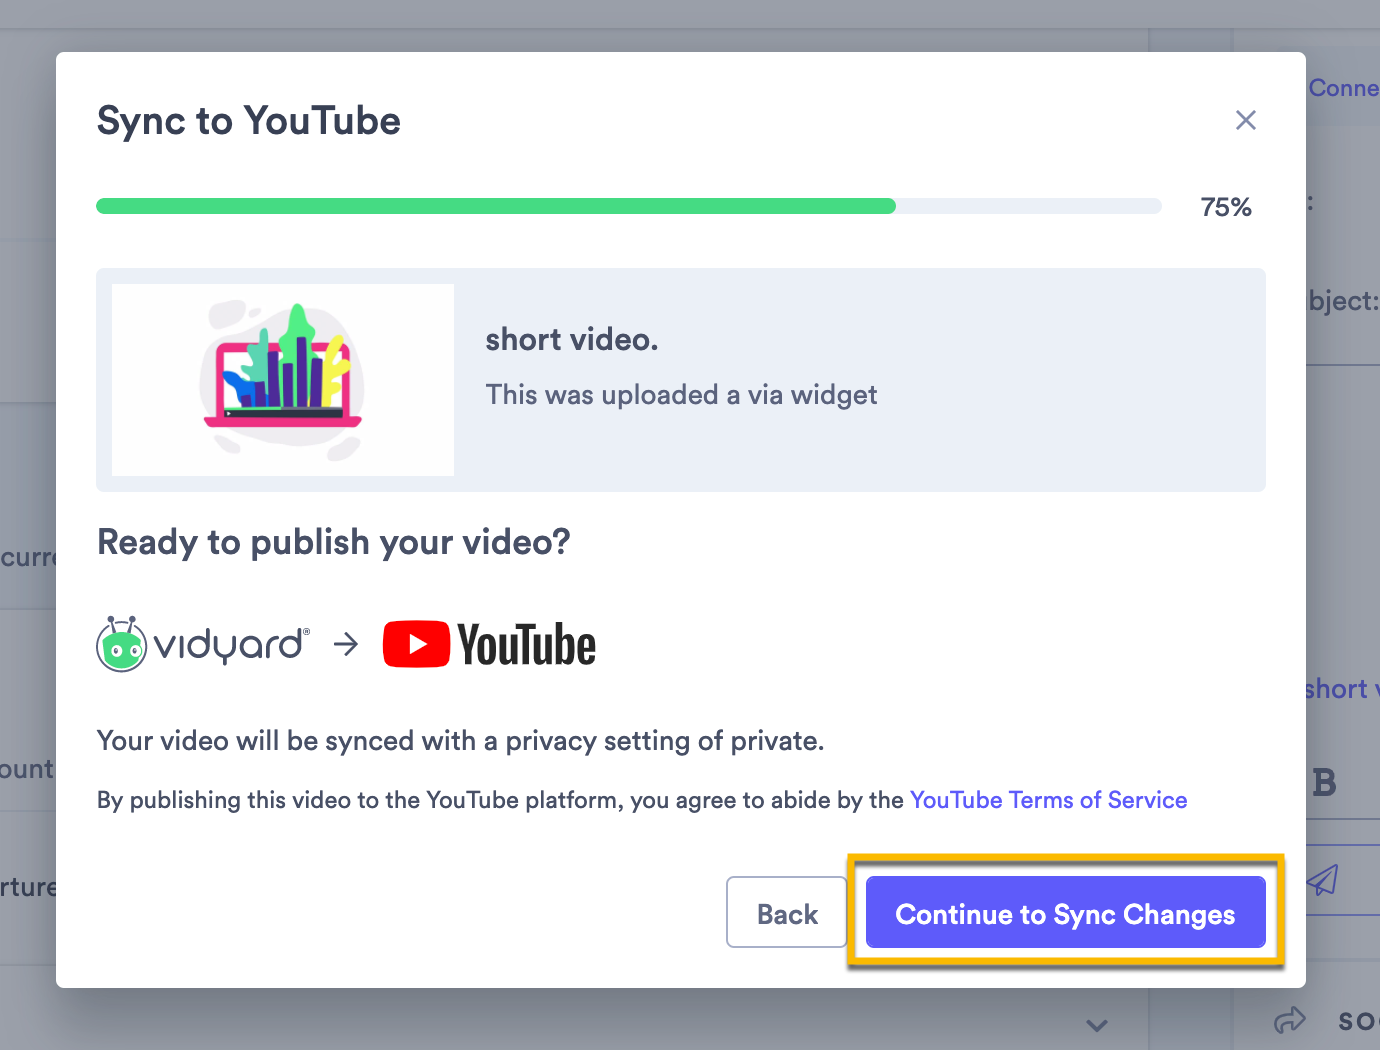 Last steps in the process to review and confirm that you want to sync changes to your video on YouTube